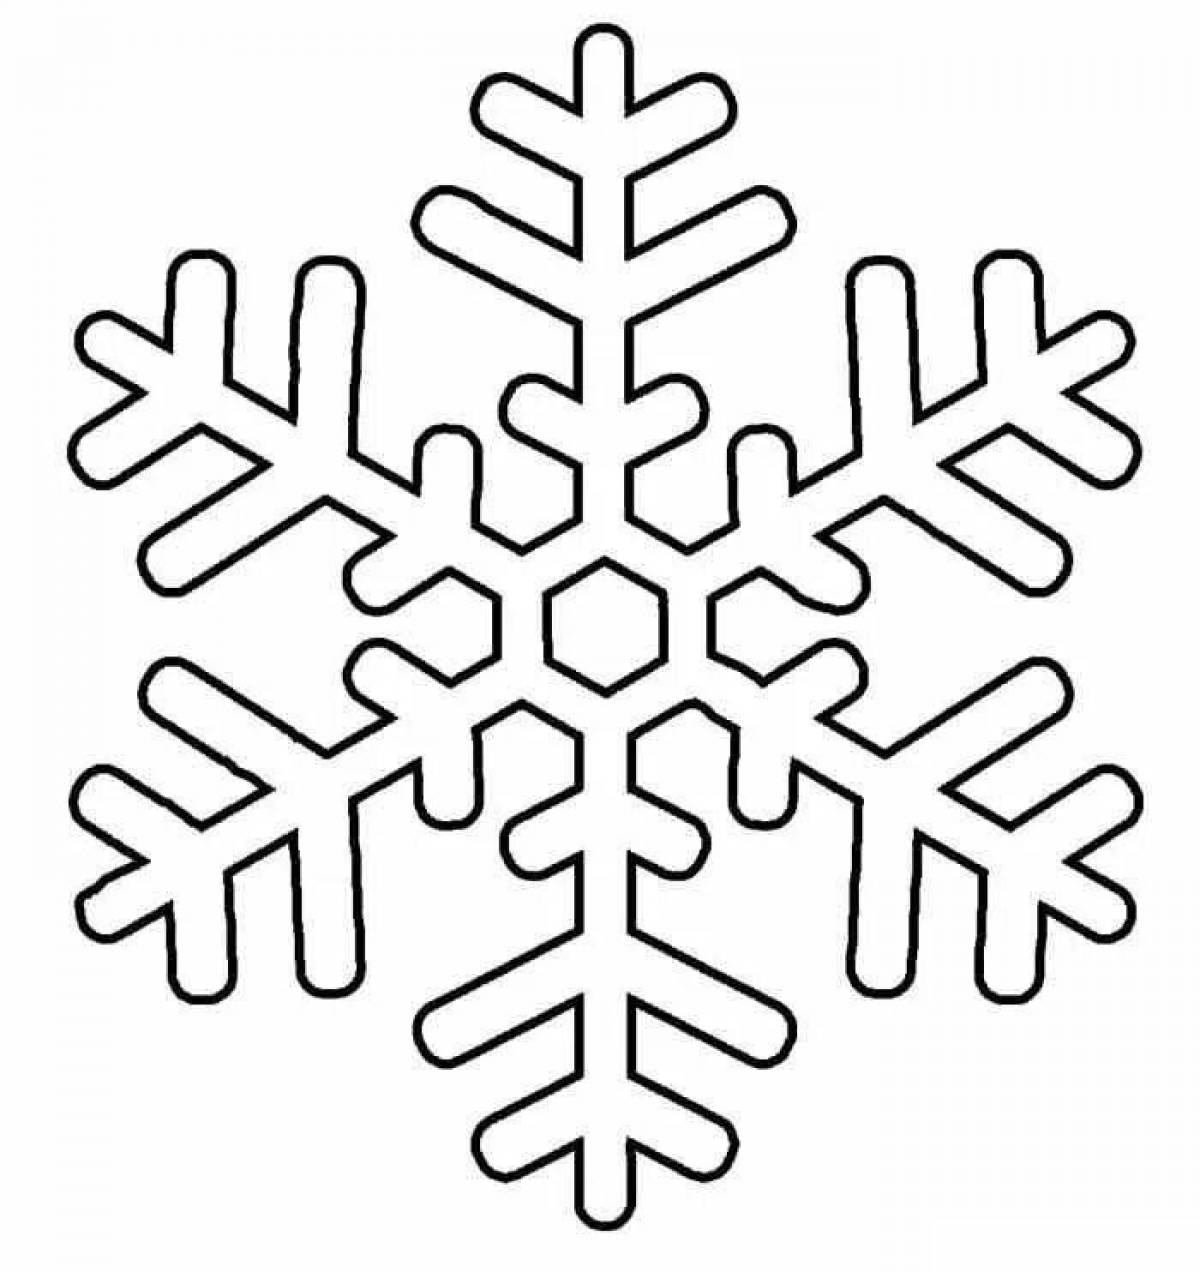 Fabulous snowflake coloring pages for 4-5 year olds